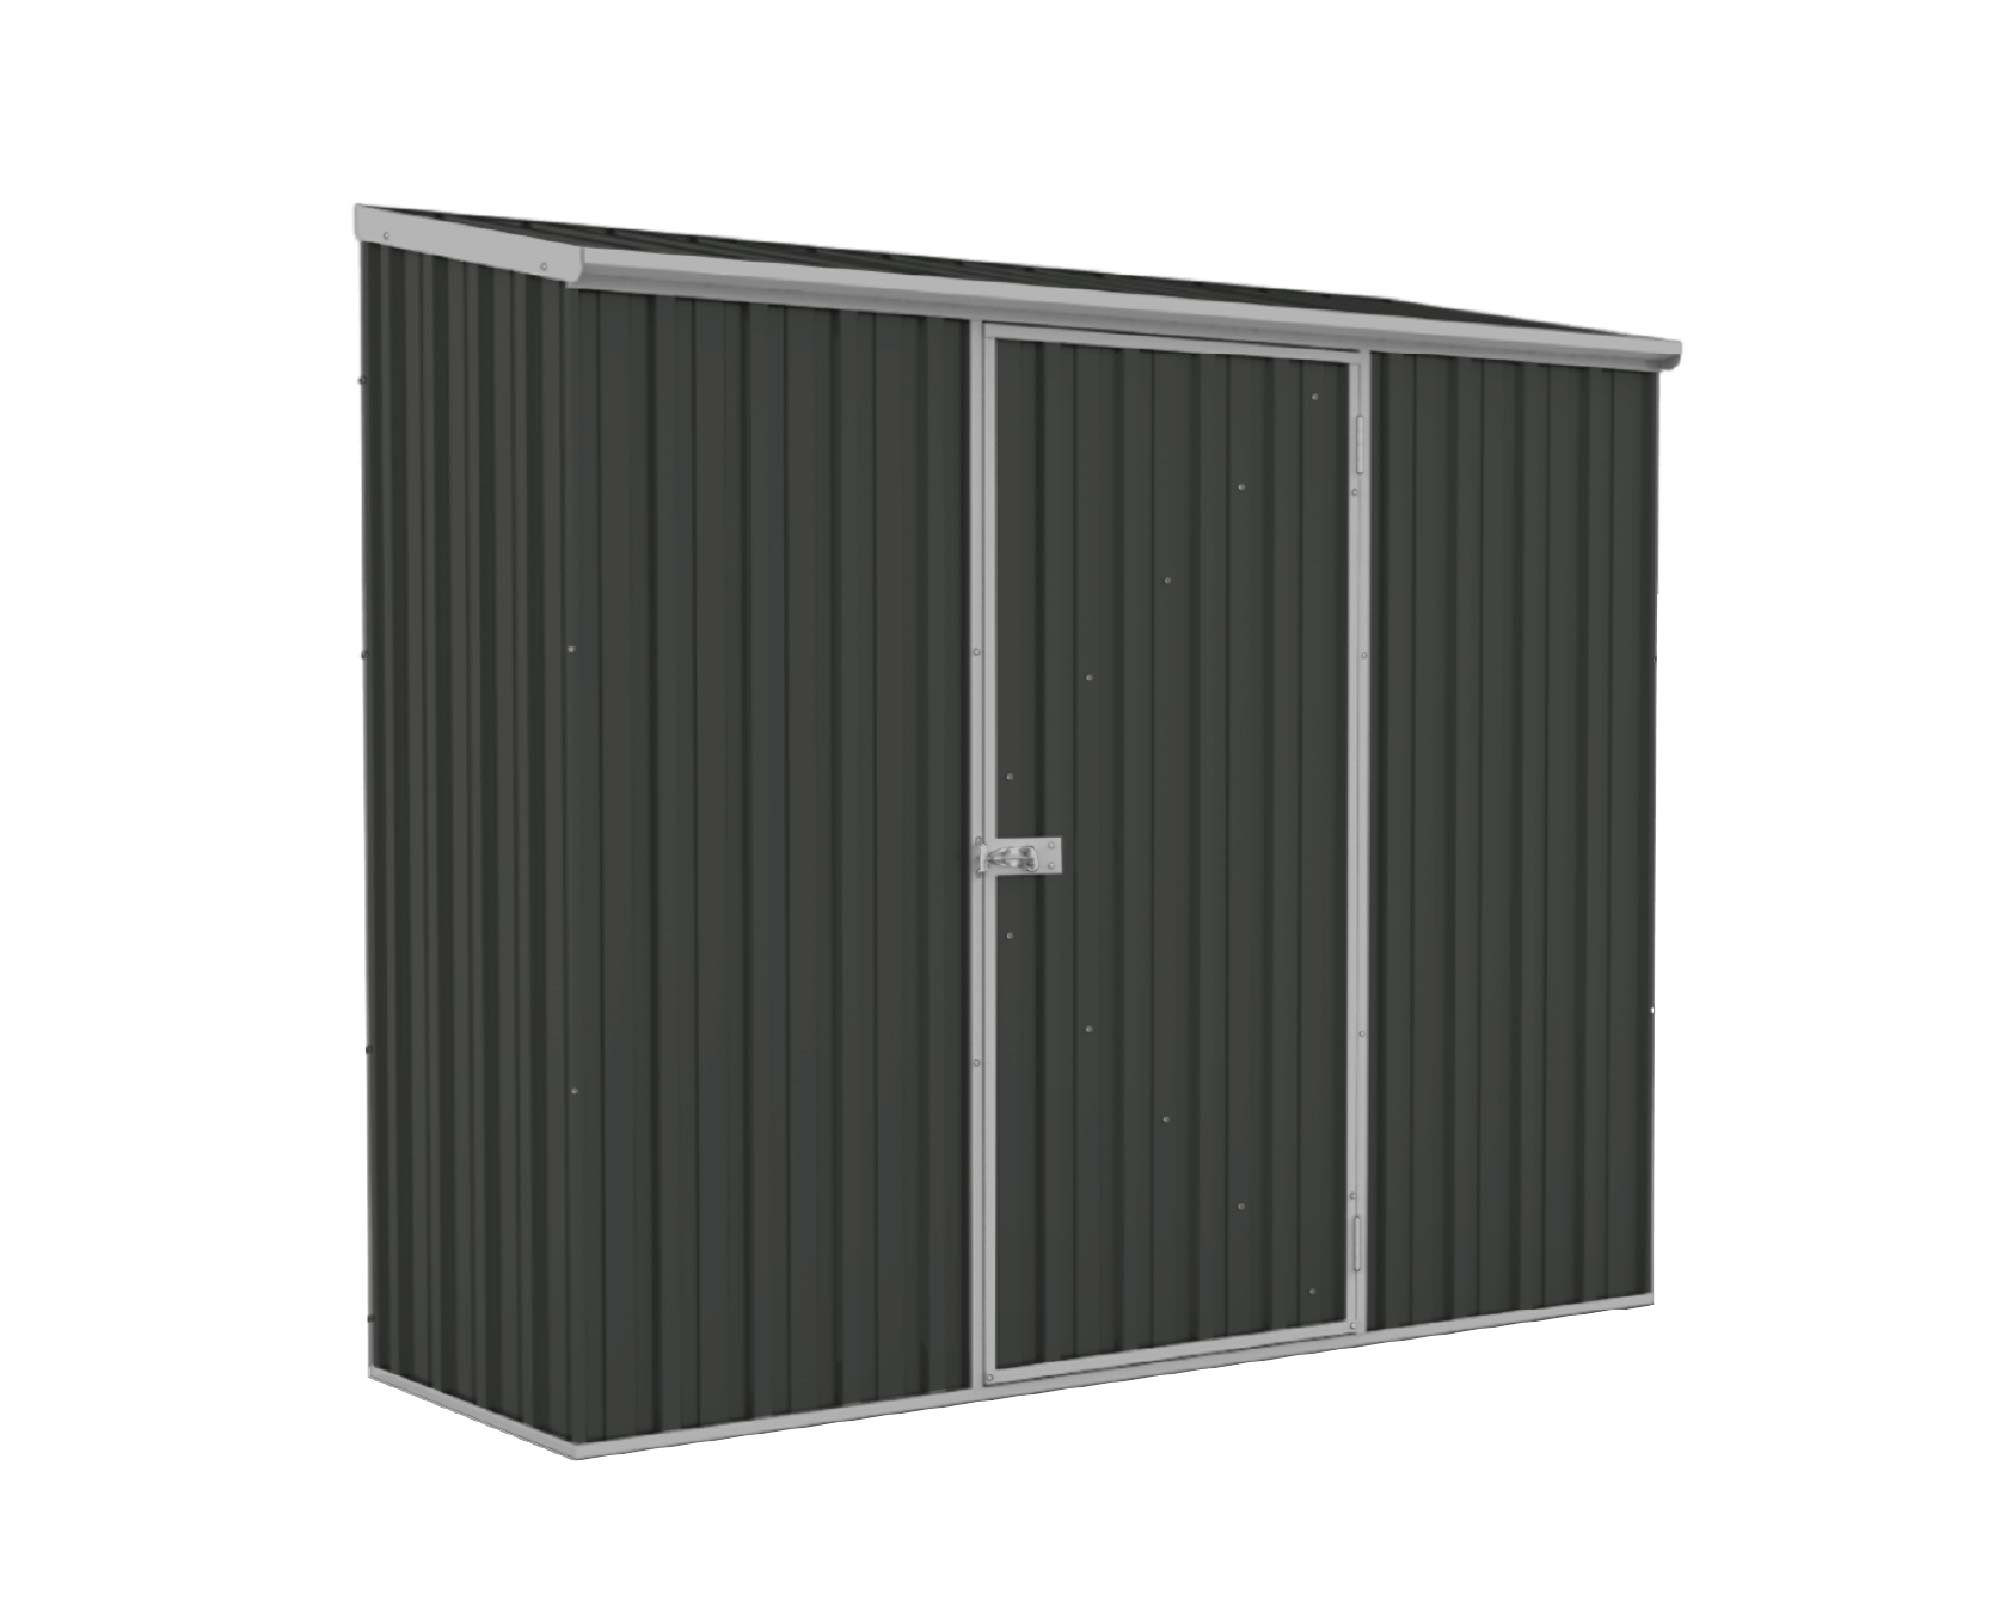 Space Saver Garden Shed Single Door - 2.26 x 0.78 x 1.95m - ABSCO - Monument